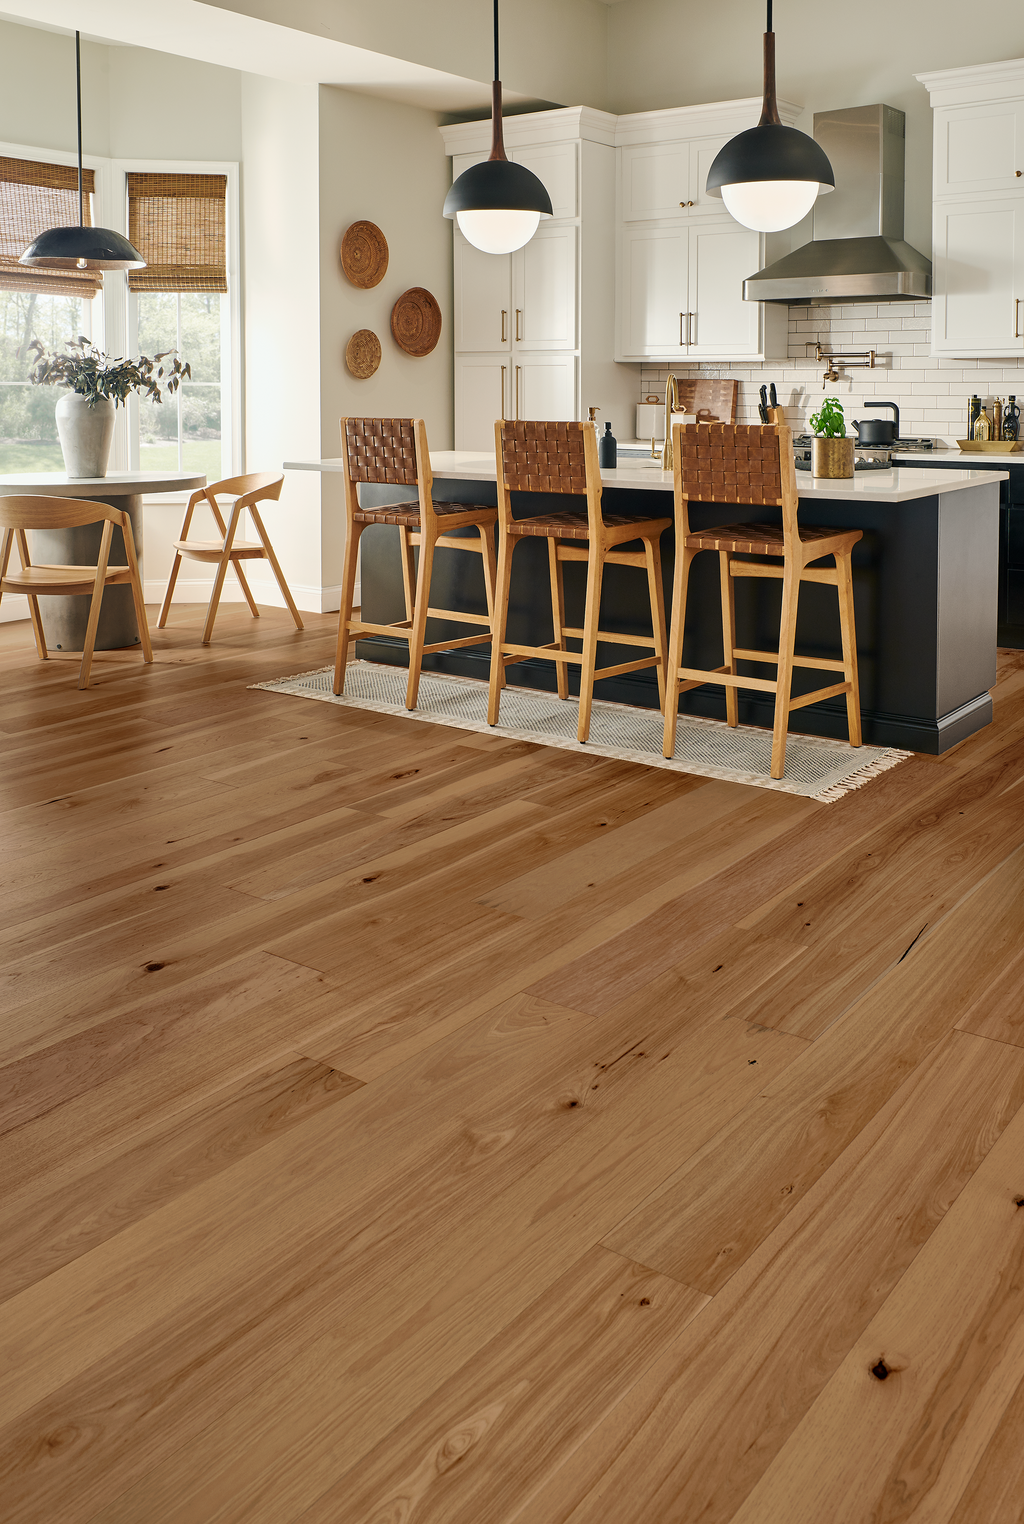 How Does Flooring Impact Resale Values?